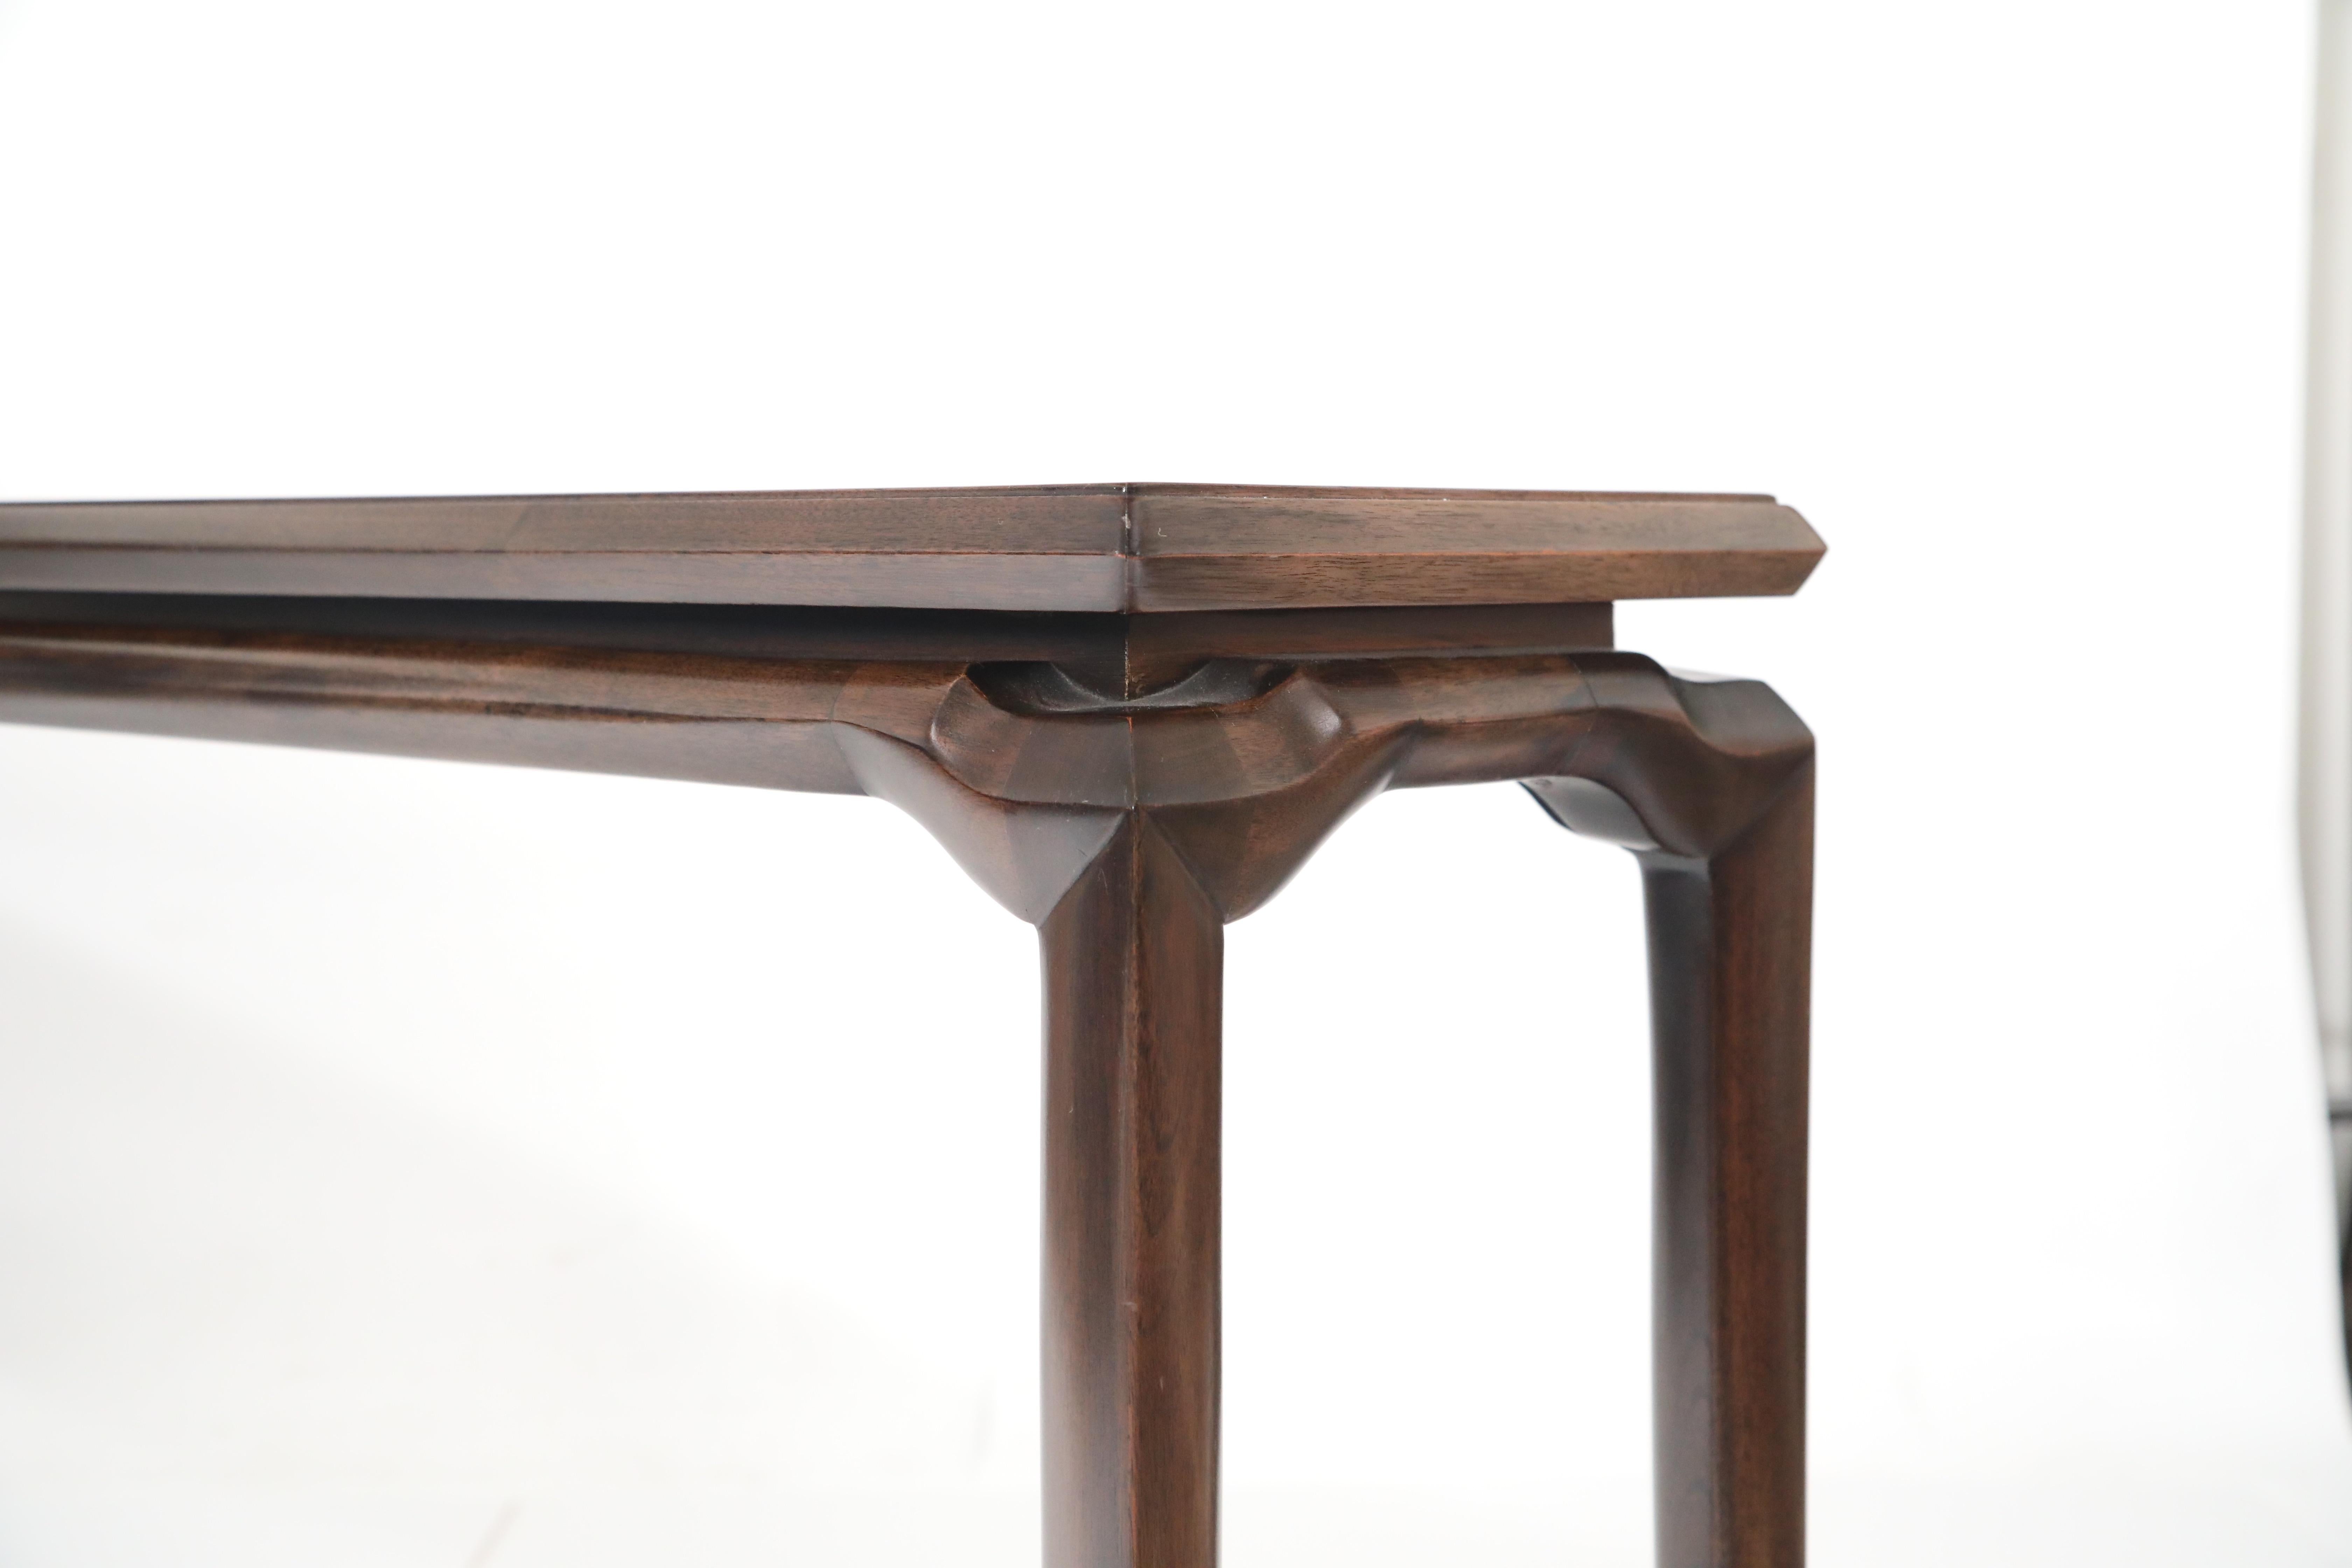 Ebony Sculptural Console Table by Maurice Bailey for Monteverdi-Young, c 1960s, Signed